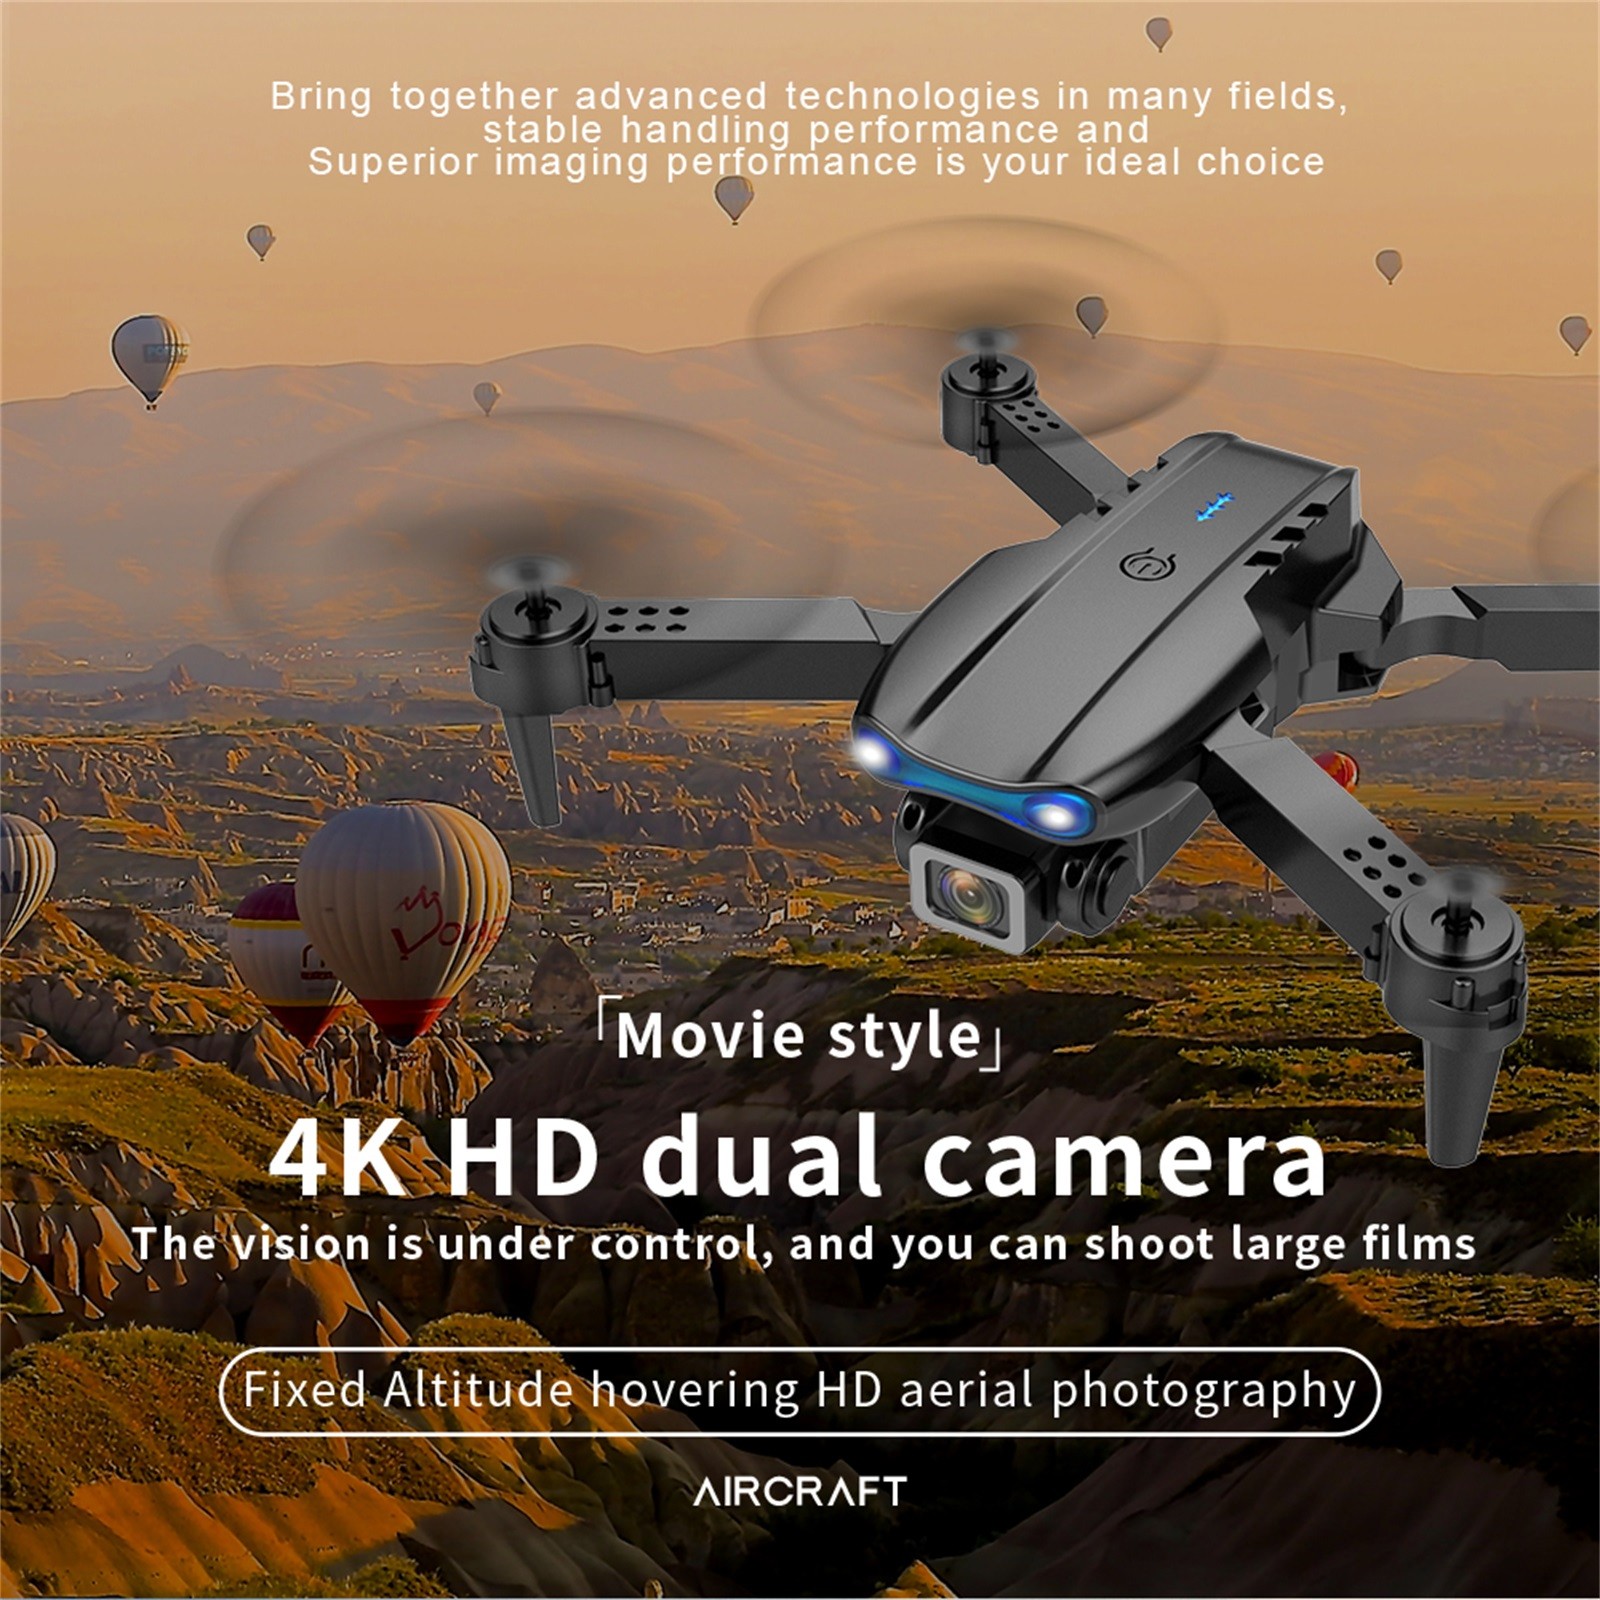 K3 RC Drone 4K HD Dual Camera WiFi FPV Height Keeps Foldable Dron 1080P Real-time Transmission RC Quadcopter Toy Airplane #50